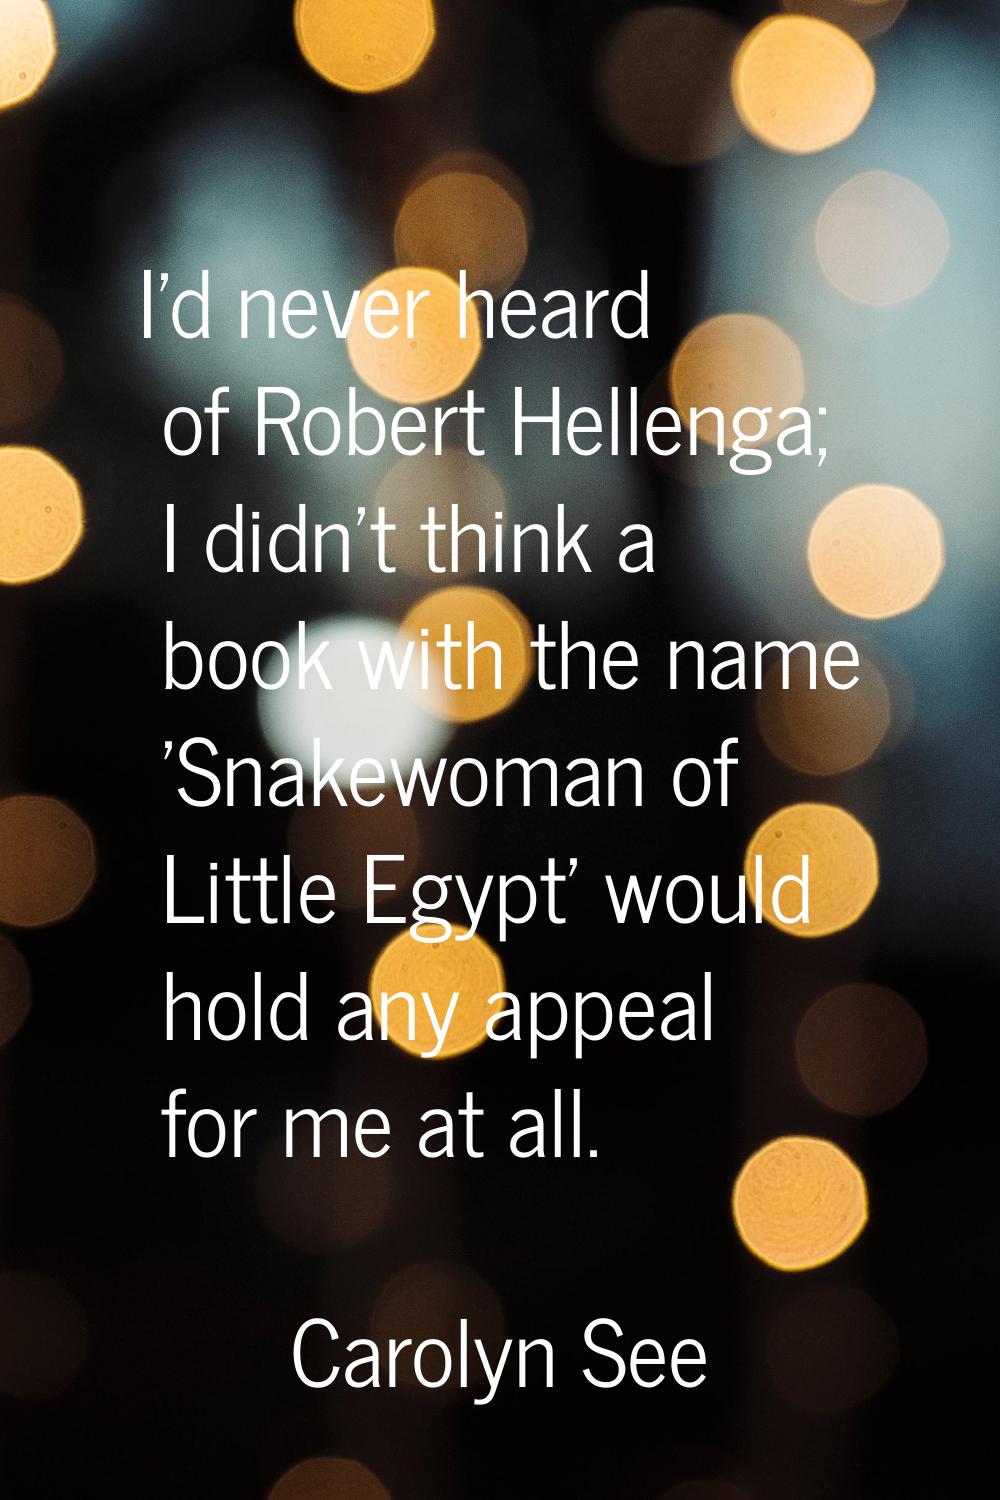 I'd never heard of Robert Hellenga; I didn't think a book with the name 'Snakewoman of Little Egypt